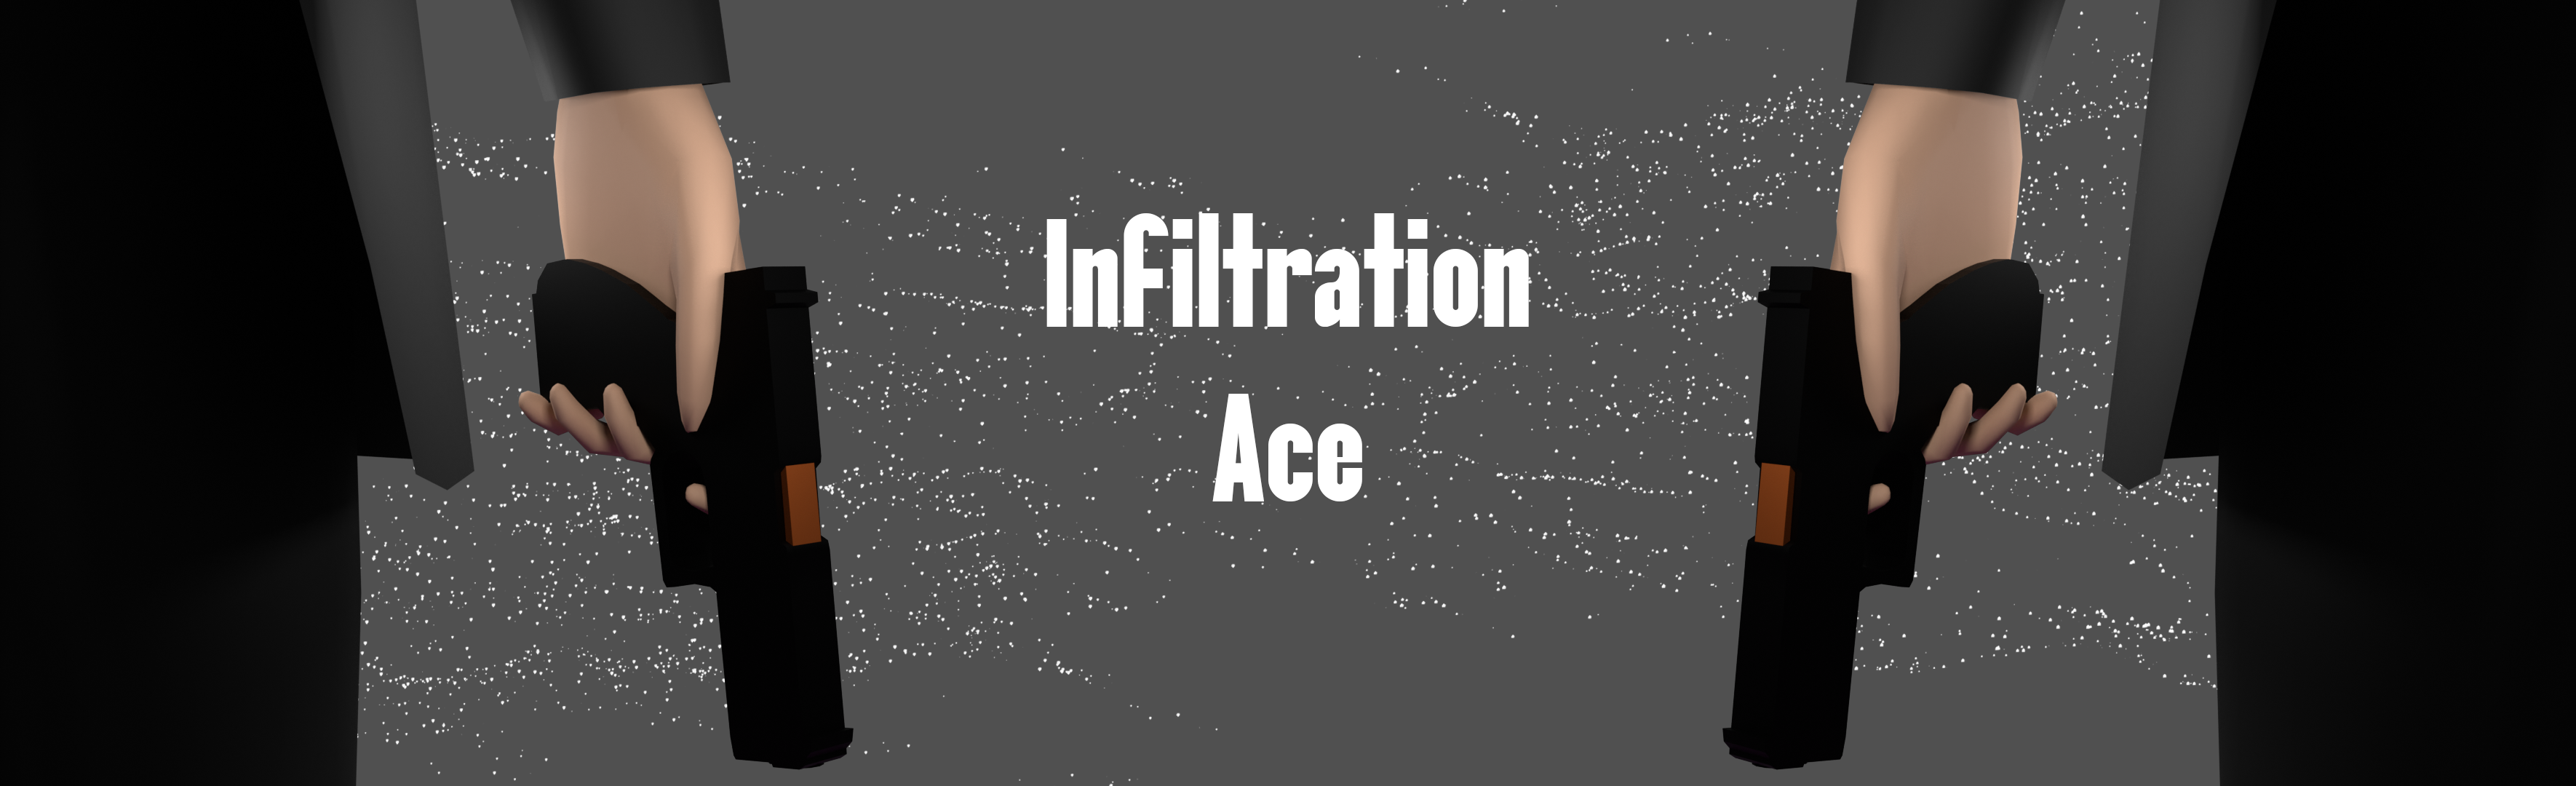 Infiltration Ace